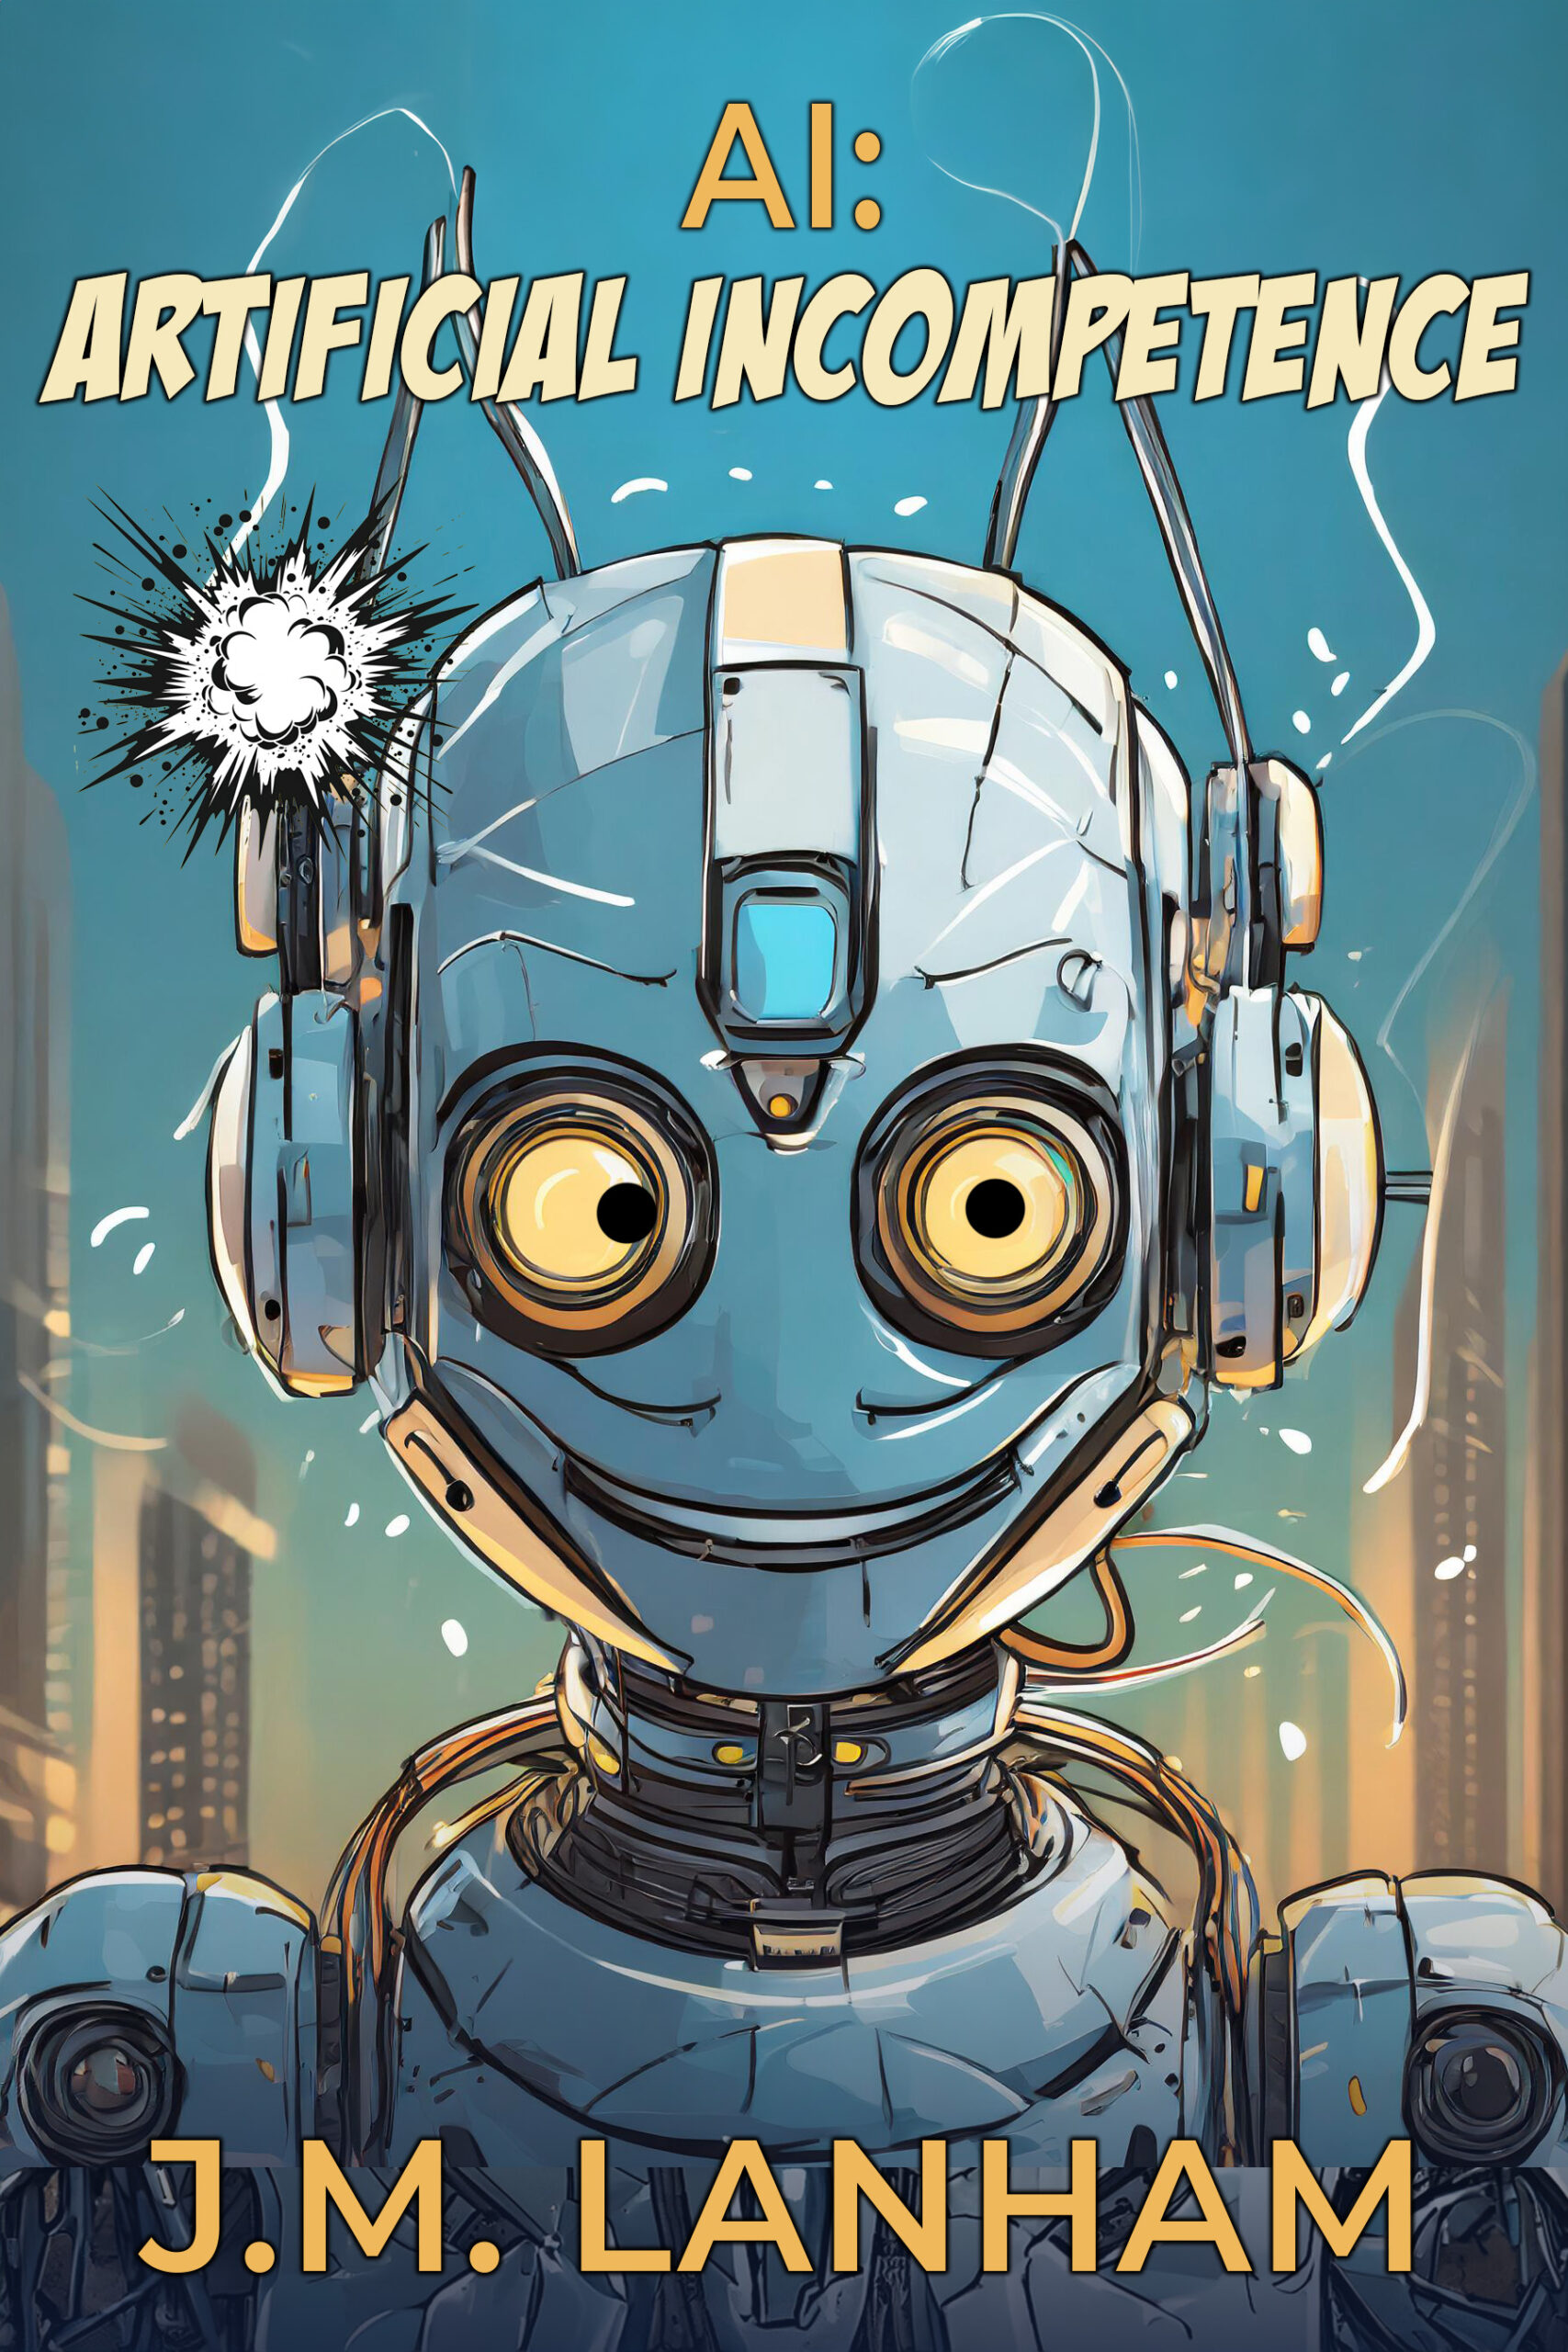 Book cover for AI: Artificial Incompetence. An image of a crosseyed android robot.